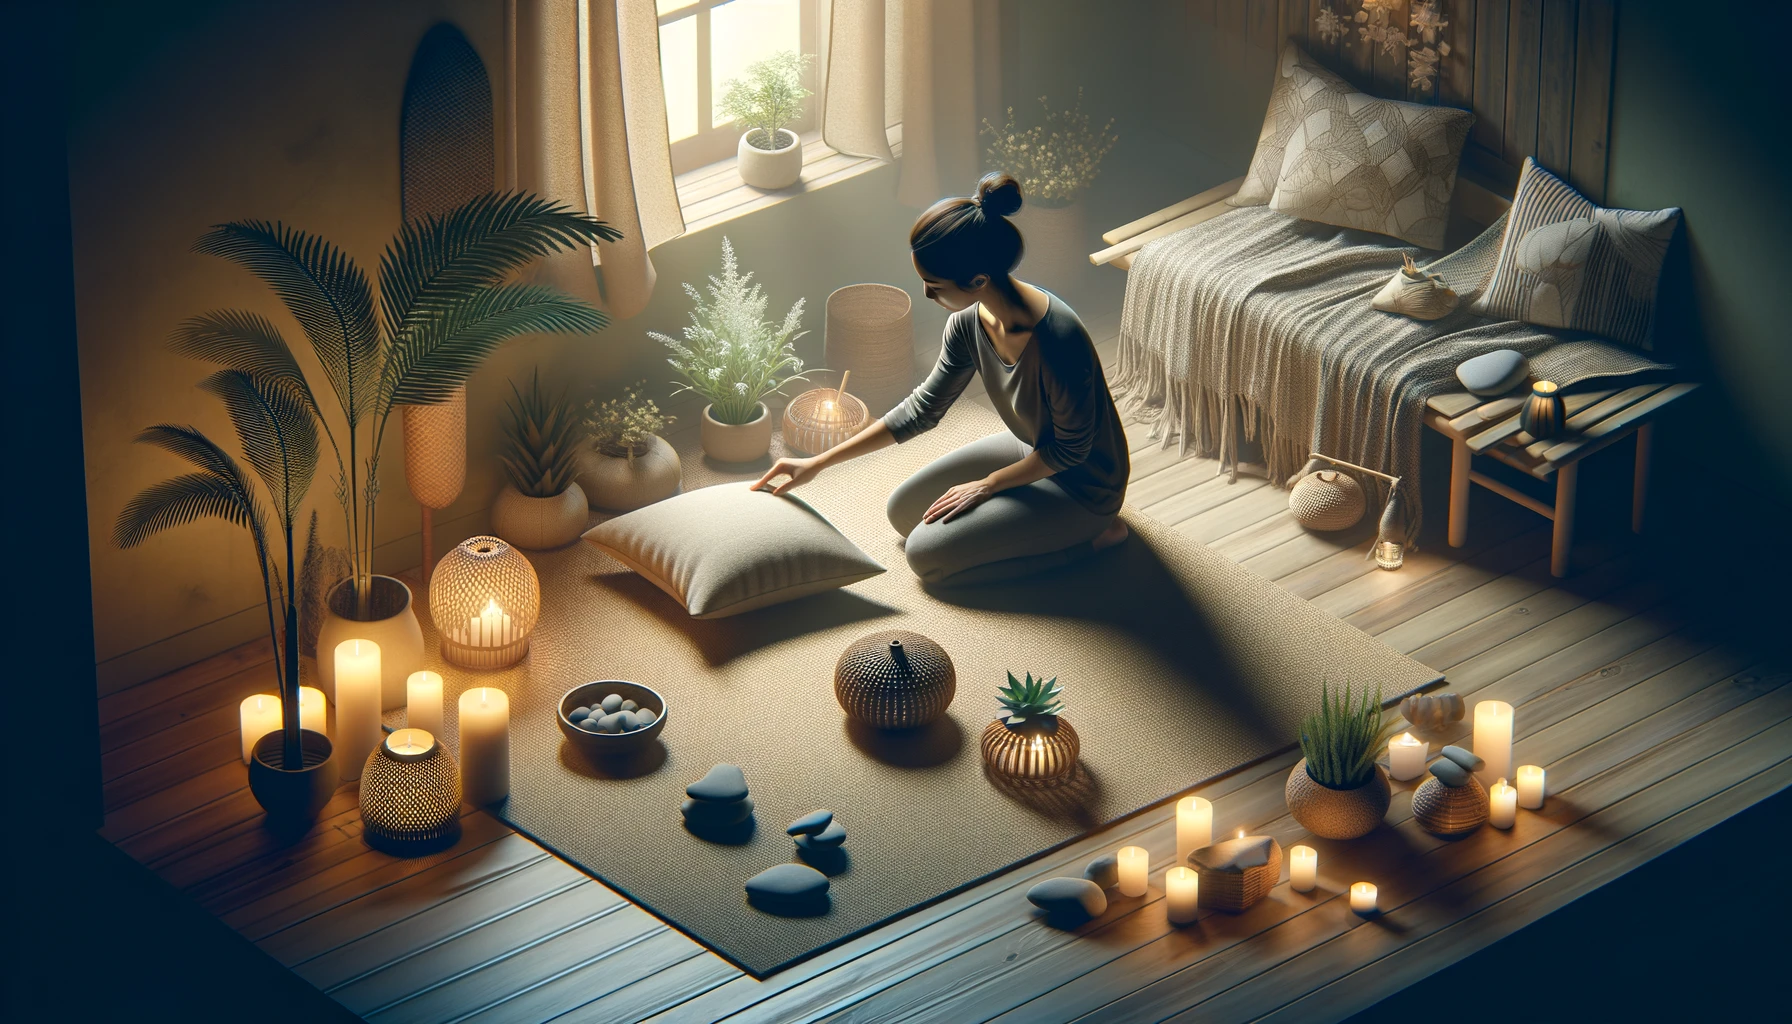 A woman arranging her meditation space at home. The scene shows a cushion or mat for seating, soft lighting or candles, and natural elements